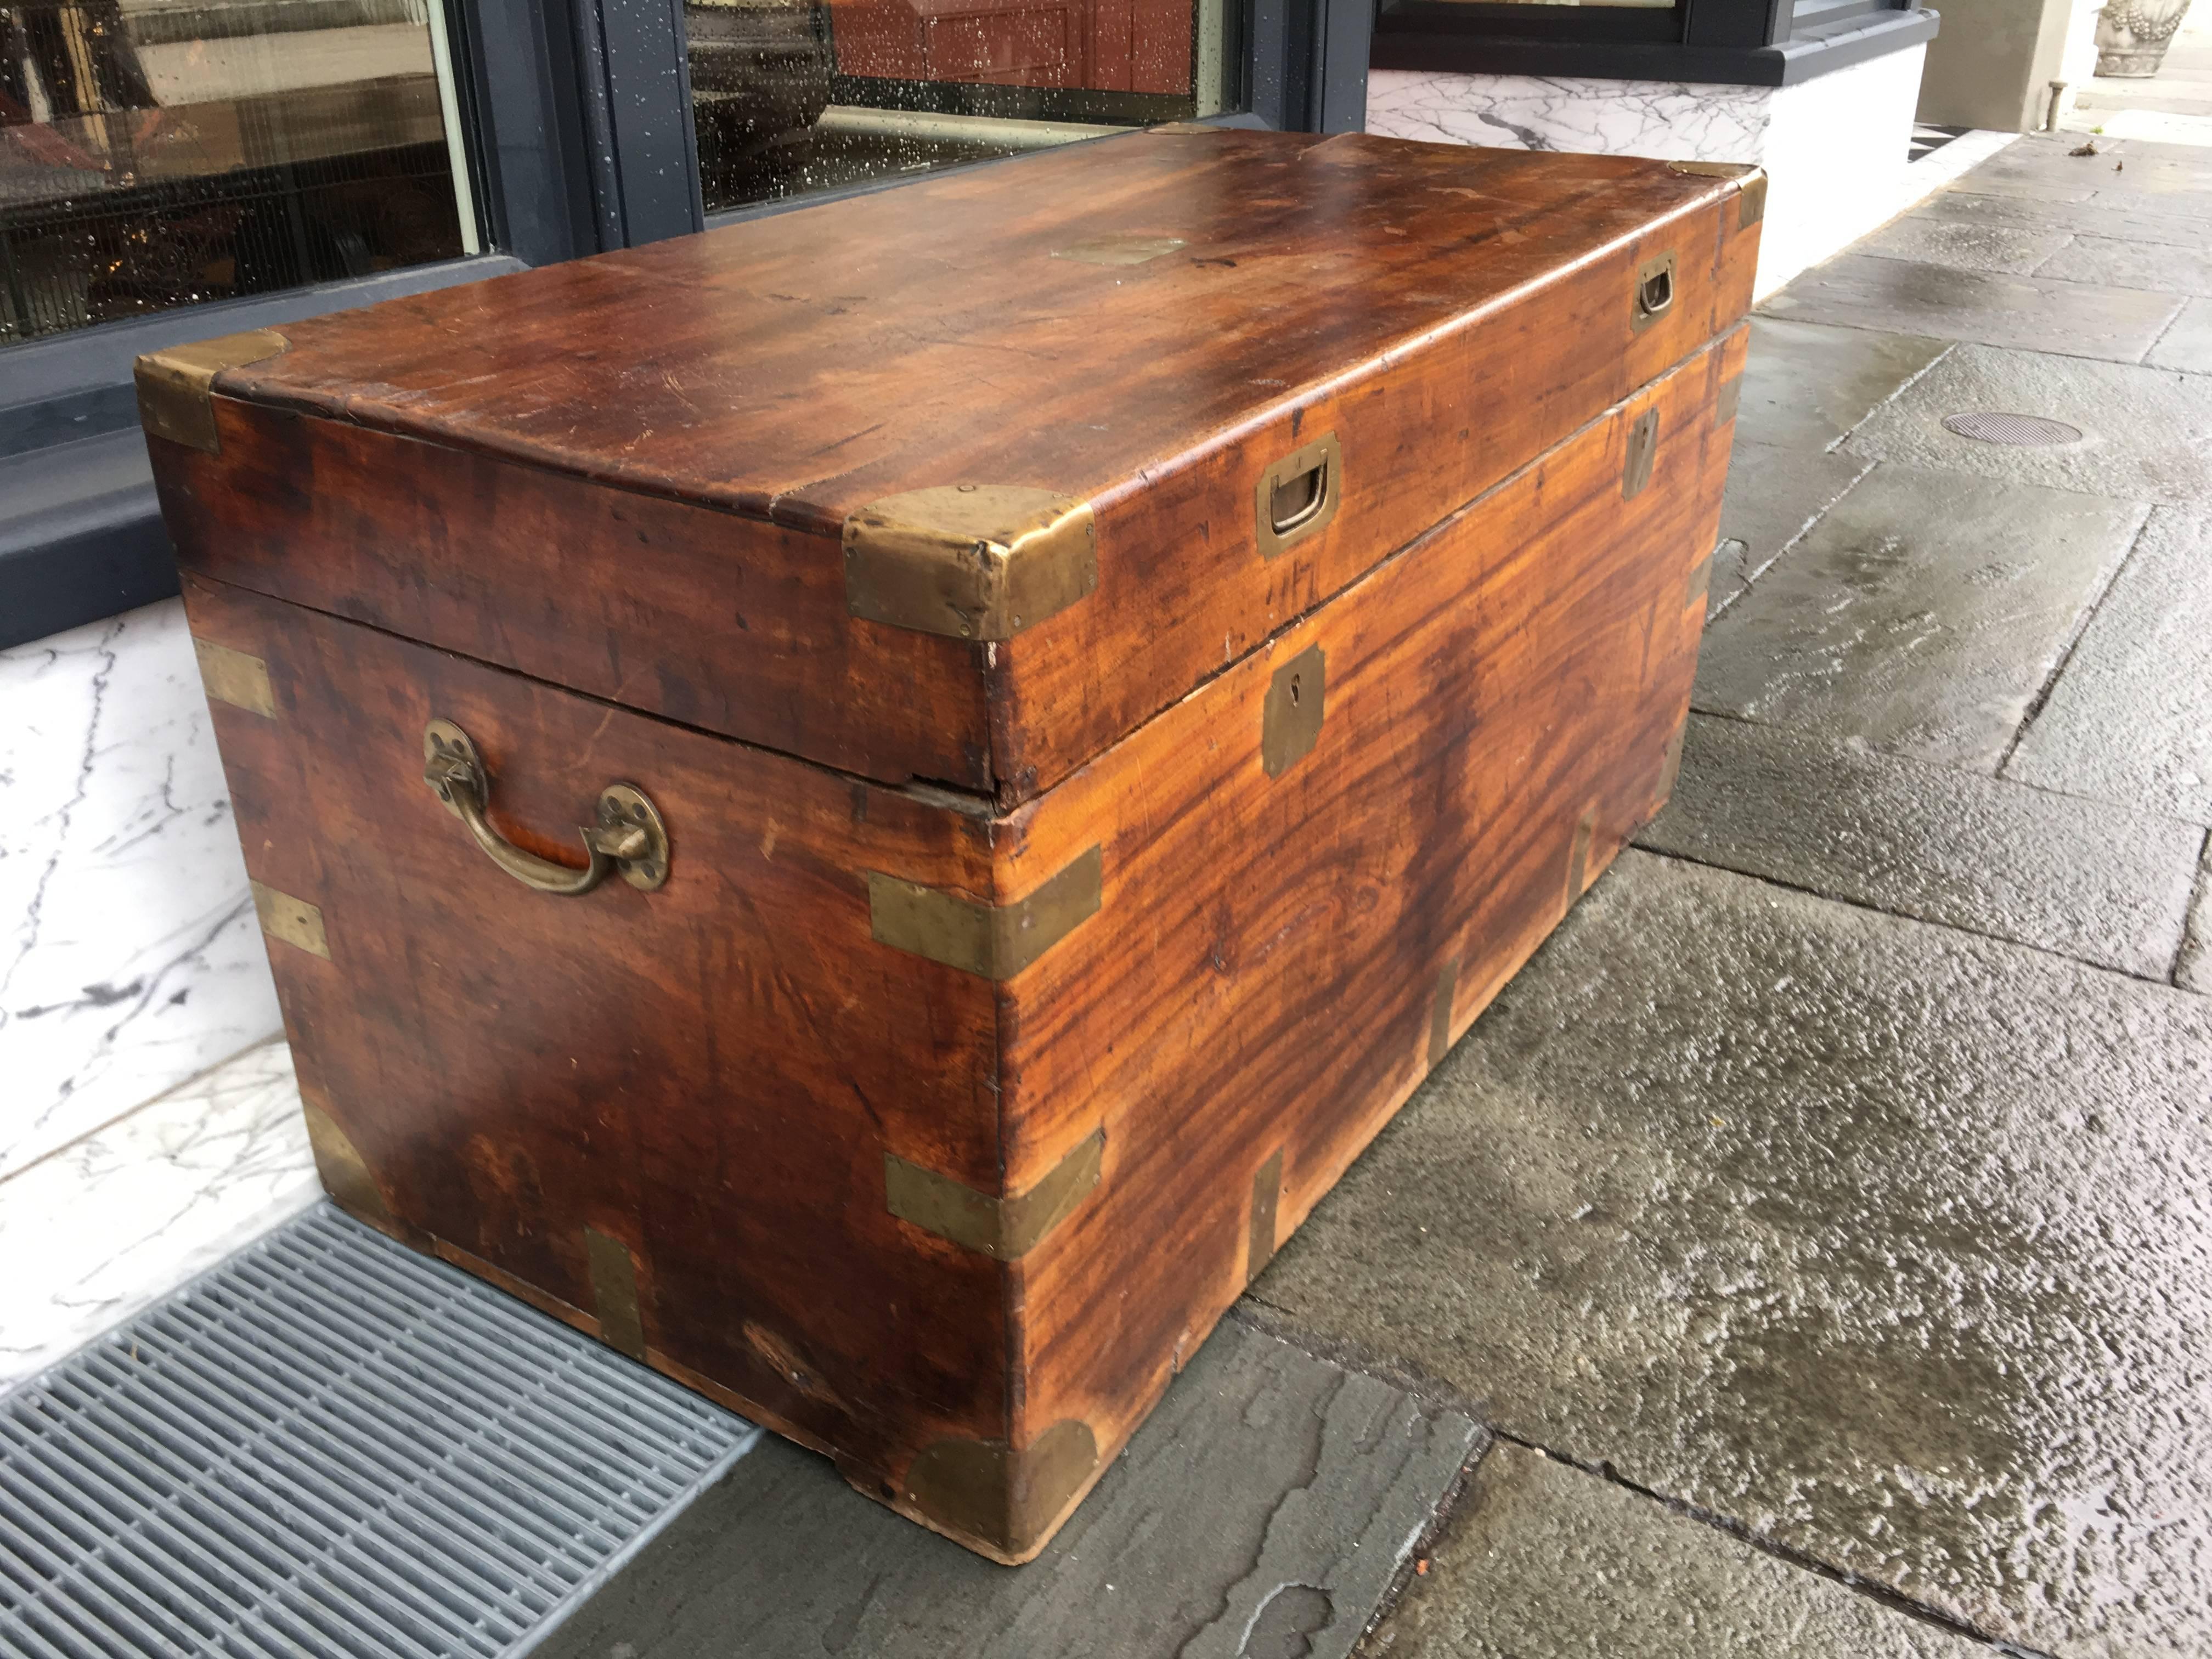 English camphor wood late 19th century trunk with brass accents and lockable top.